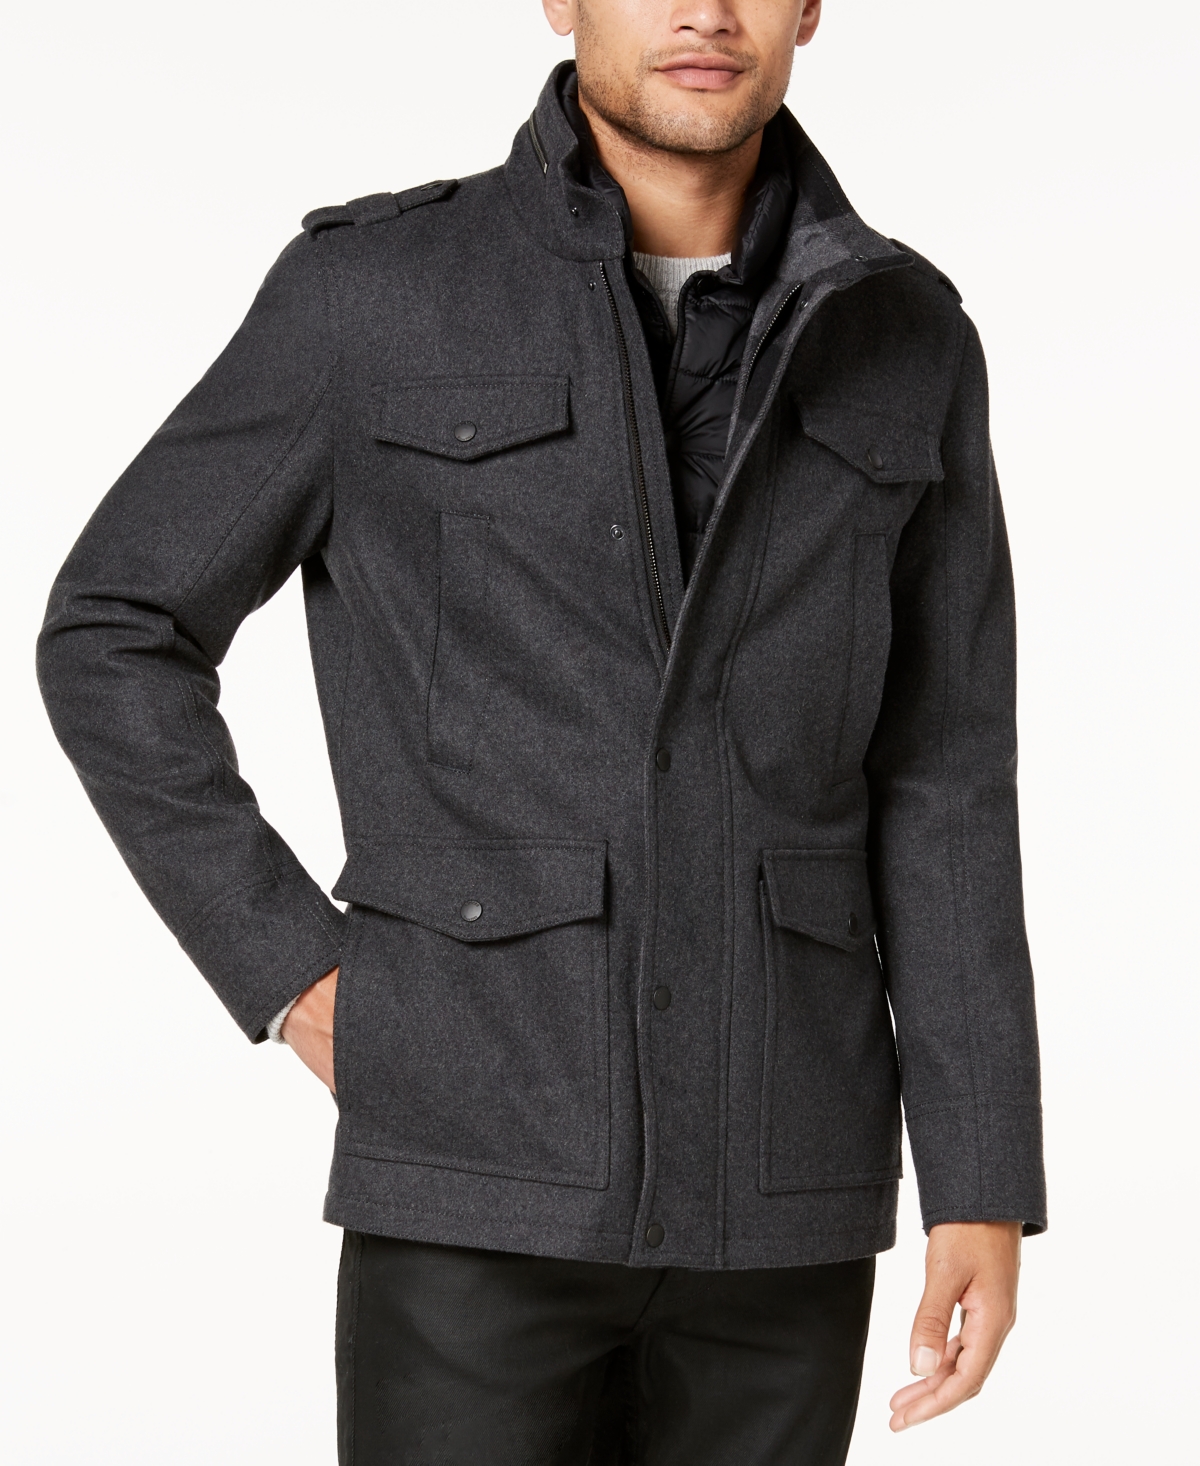 Men's Military-Inspired Coat with Plaid Detail, Created for Macy's - Charcoal